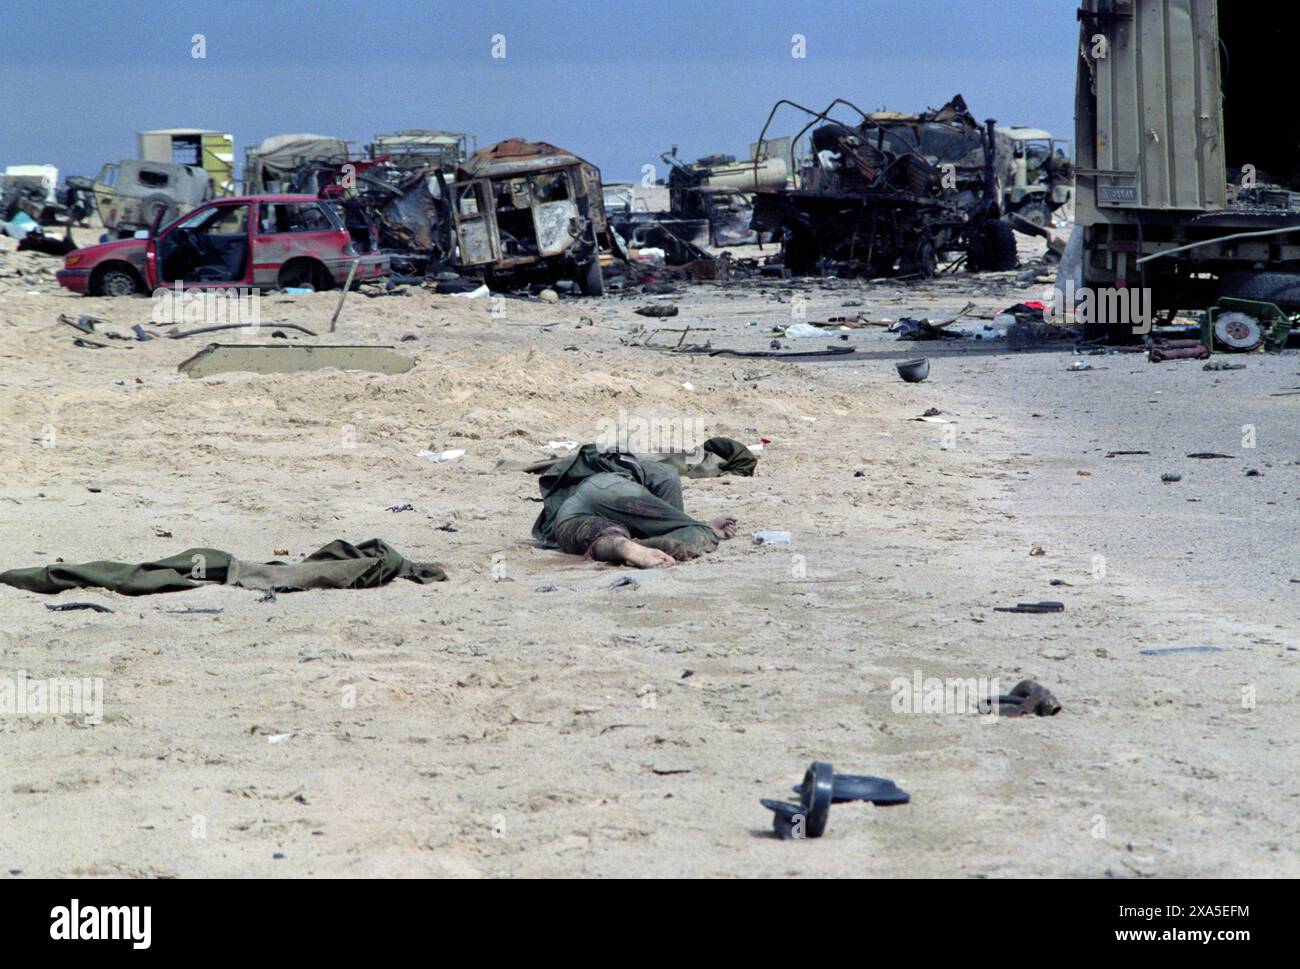 5th March 1991 The body of a soldier lies in the desert with an assortment of destroyed military and civilian vehicles of an Iraqi military convoy forming a backdrop. It was attacked on Route 801, the road to Um Qasr, north of Kuwait City, by the American air force as the Iraqi army was attempting to flee to Iraq. Stock Photo